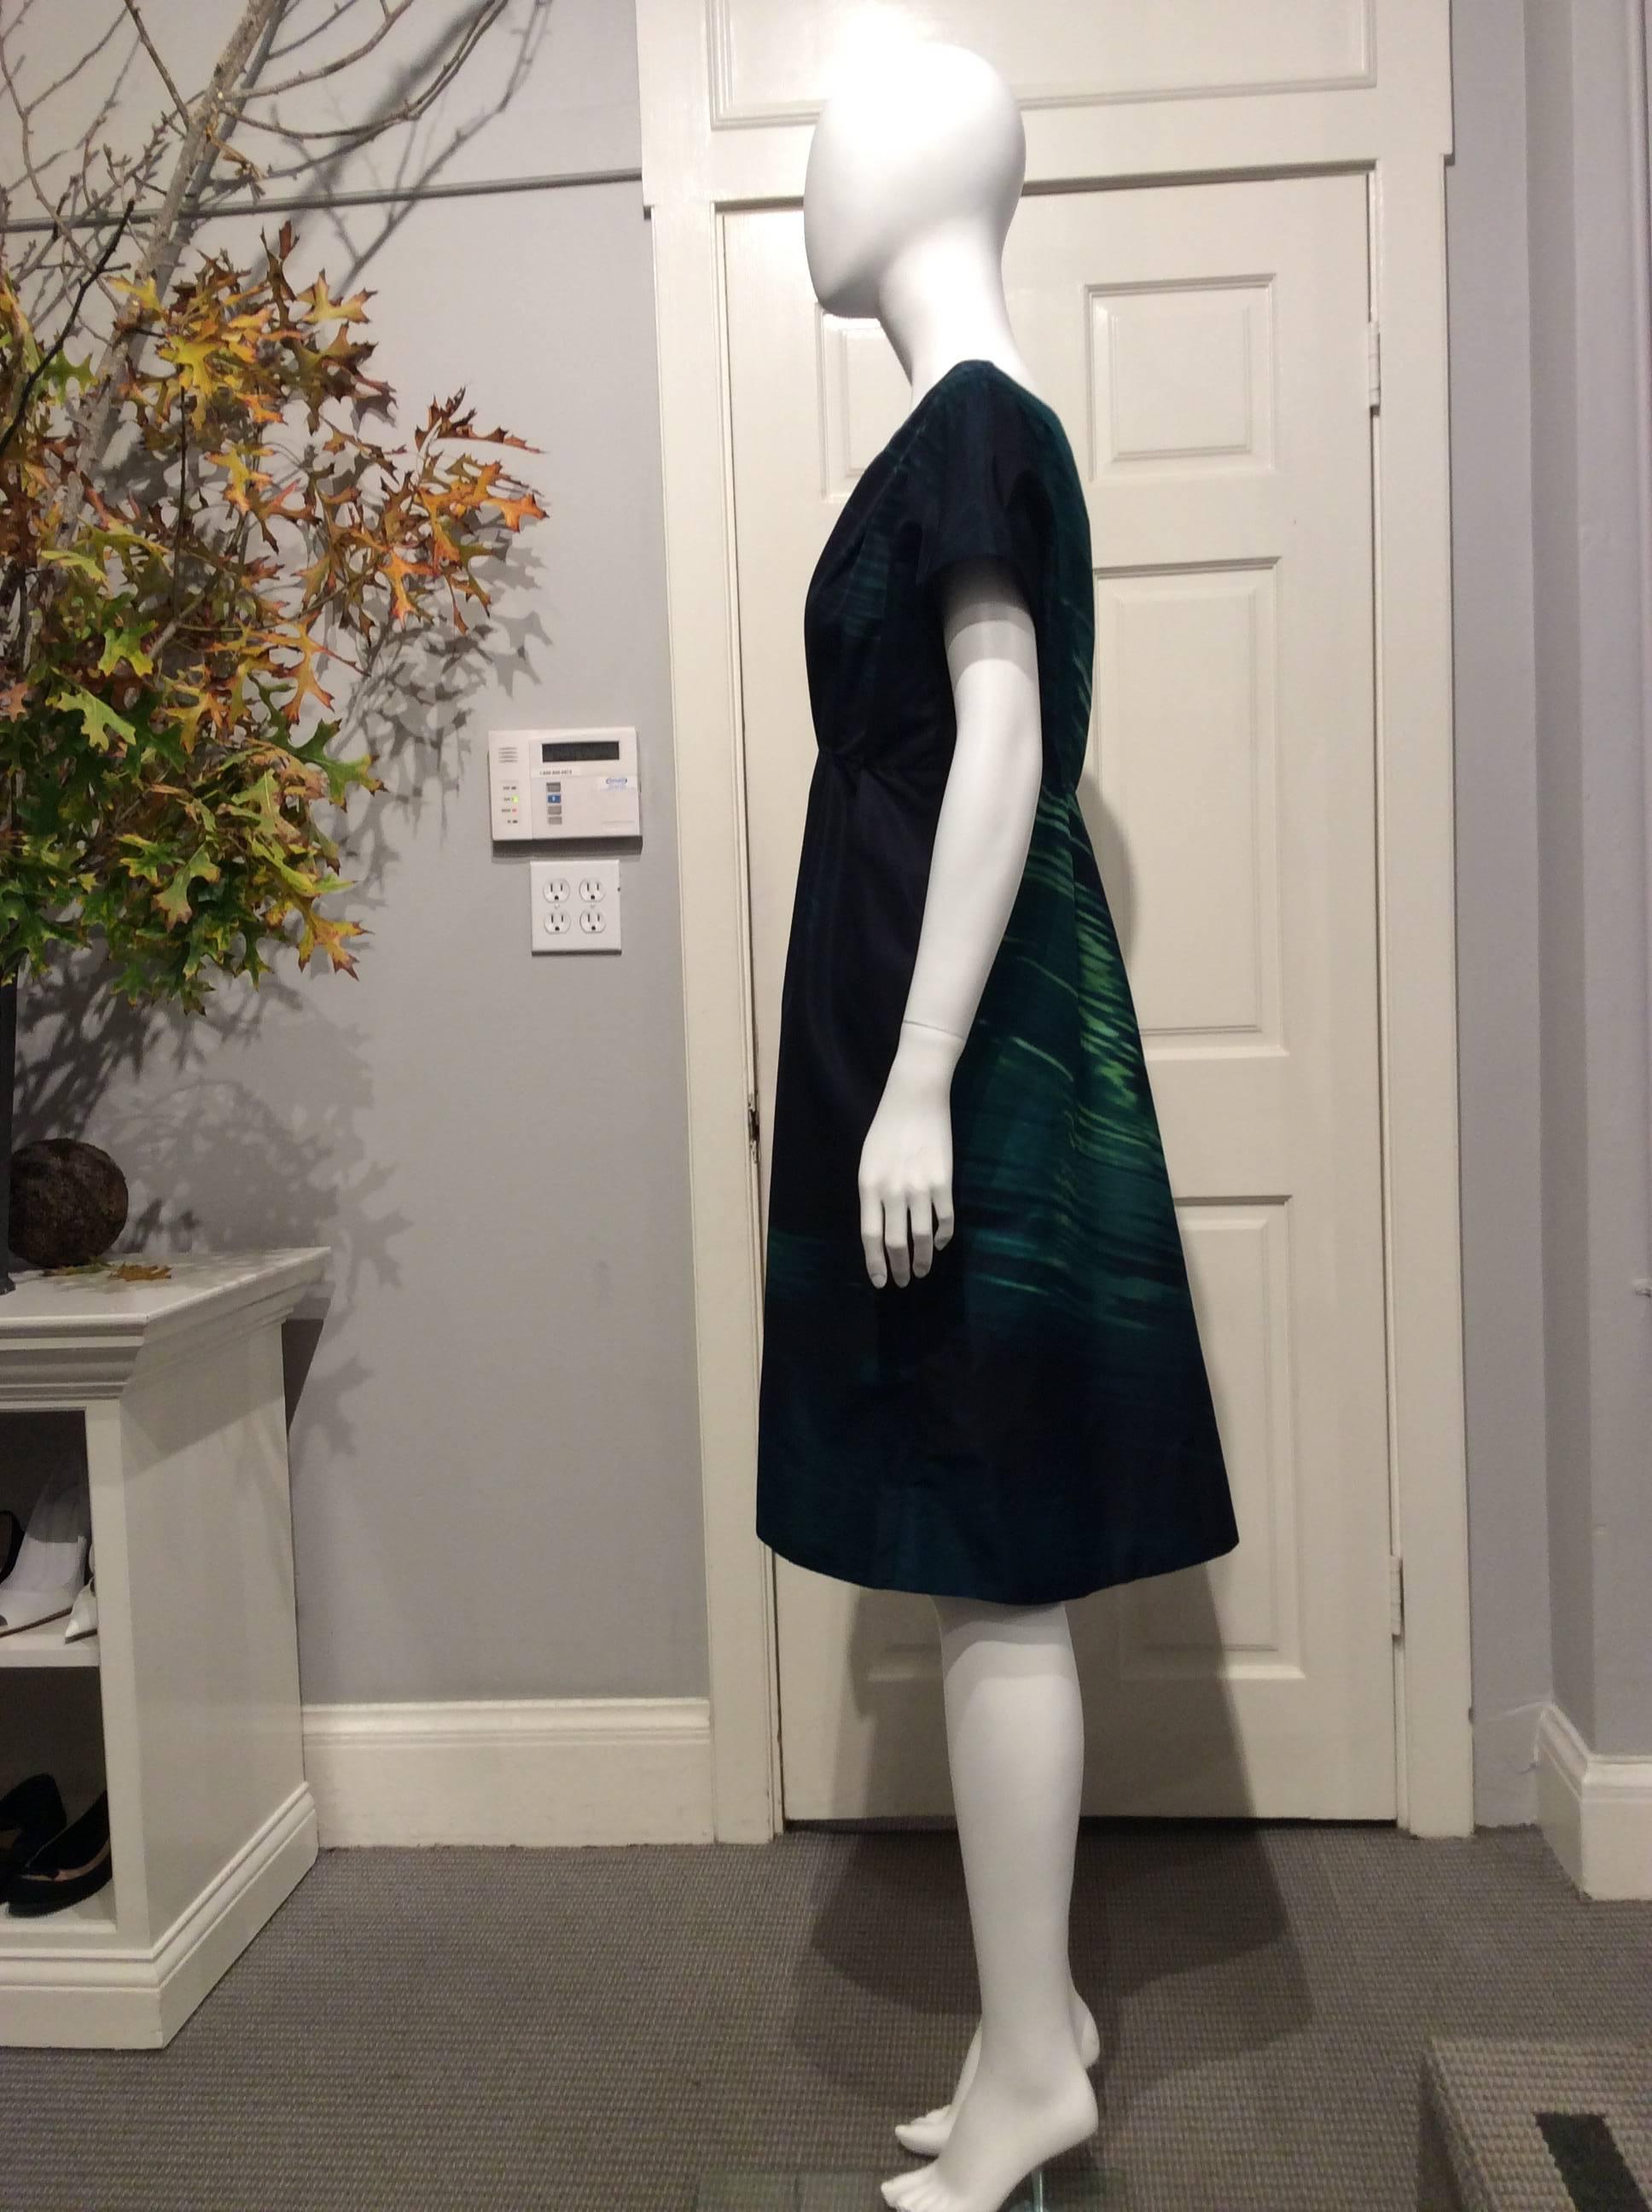 Marni silk dress with drop shoulder cap sleeves. The high waisted skirt is attached by a seam under the bust line with a few soft pleats. The way the eye catching abstract emerald green and blue black print is positioned gives it a very slimming